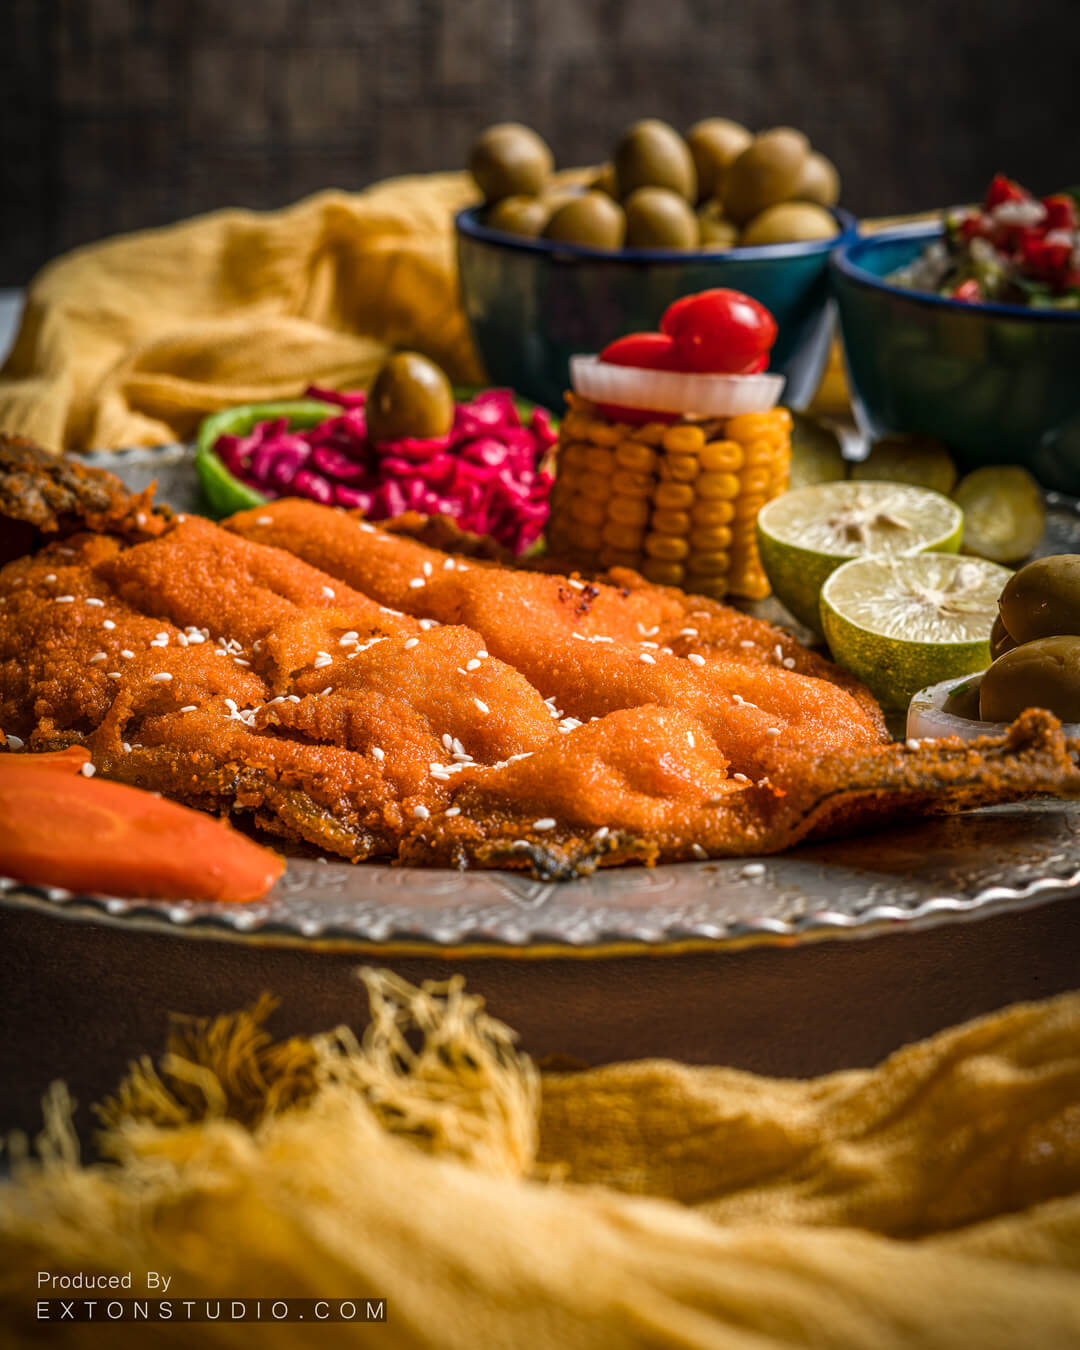 Promotional photography of fried fish